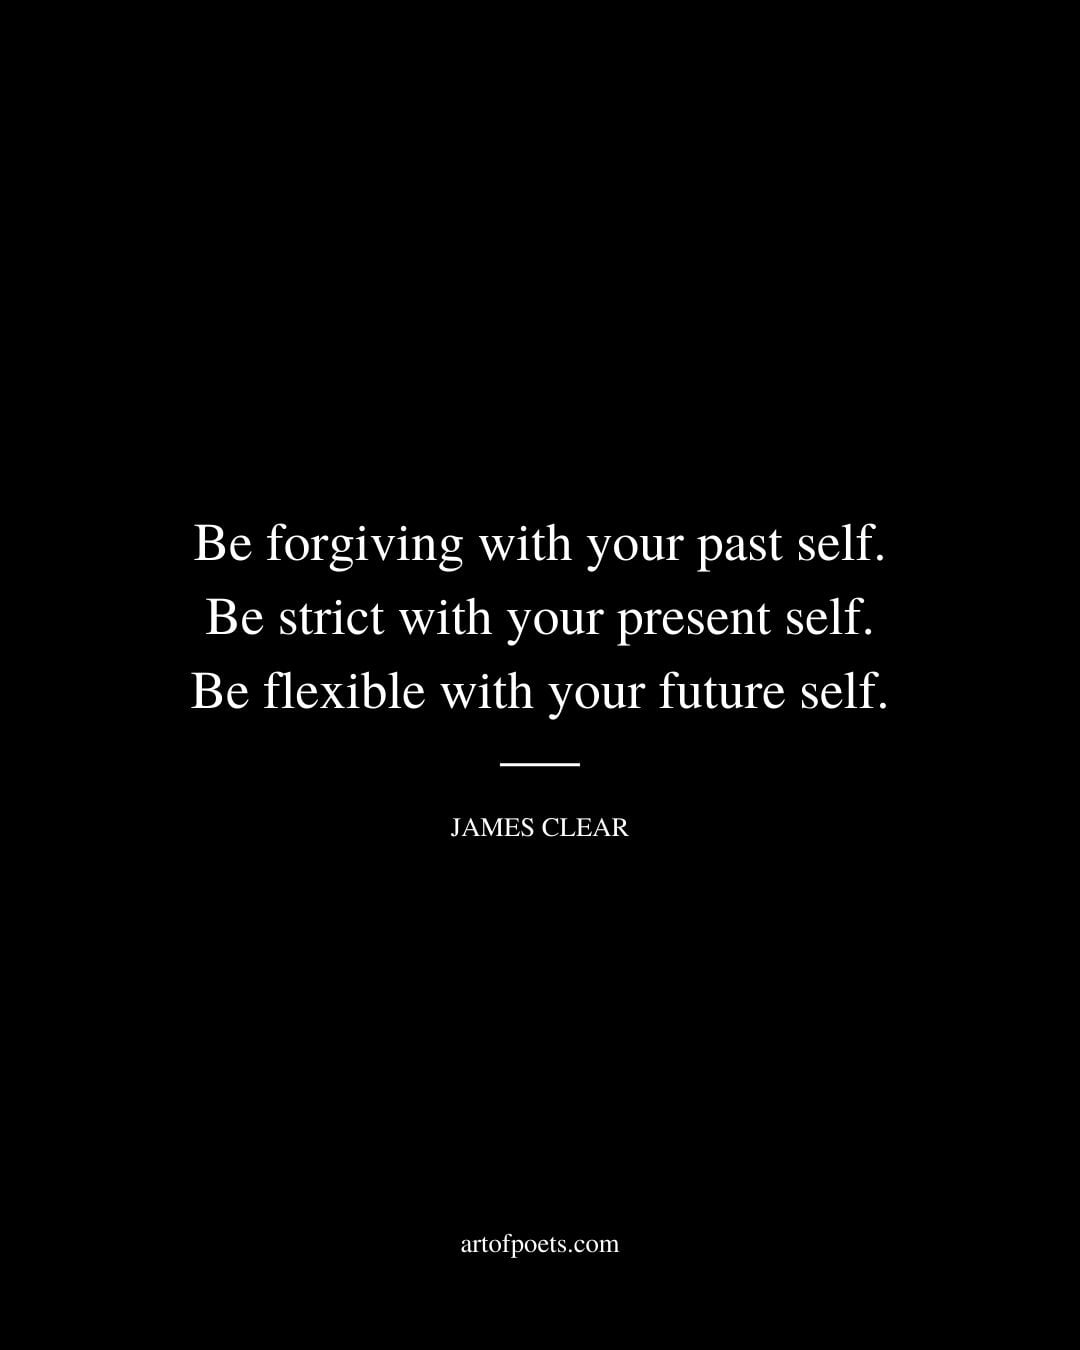 Be forgiving with your past self. Be strict with your present self. Be flexible with your future self